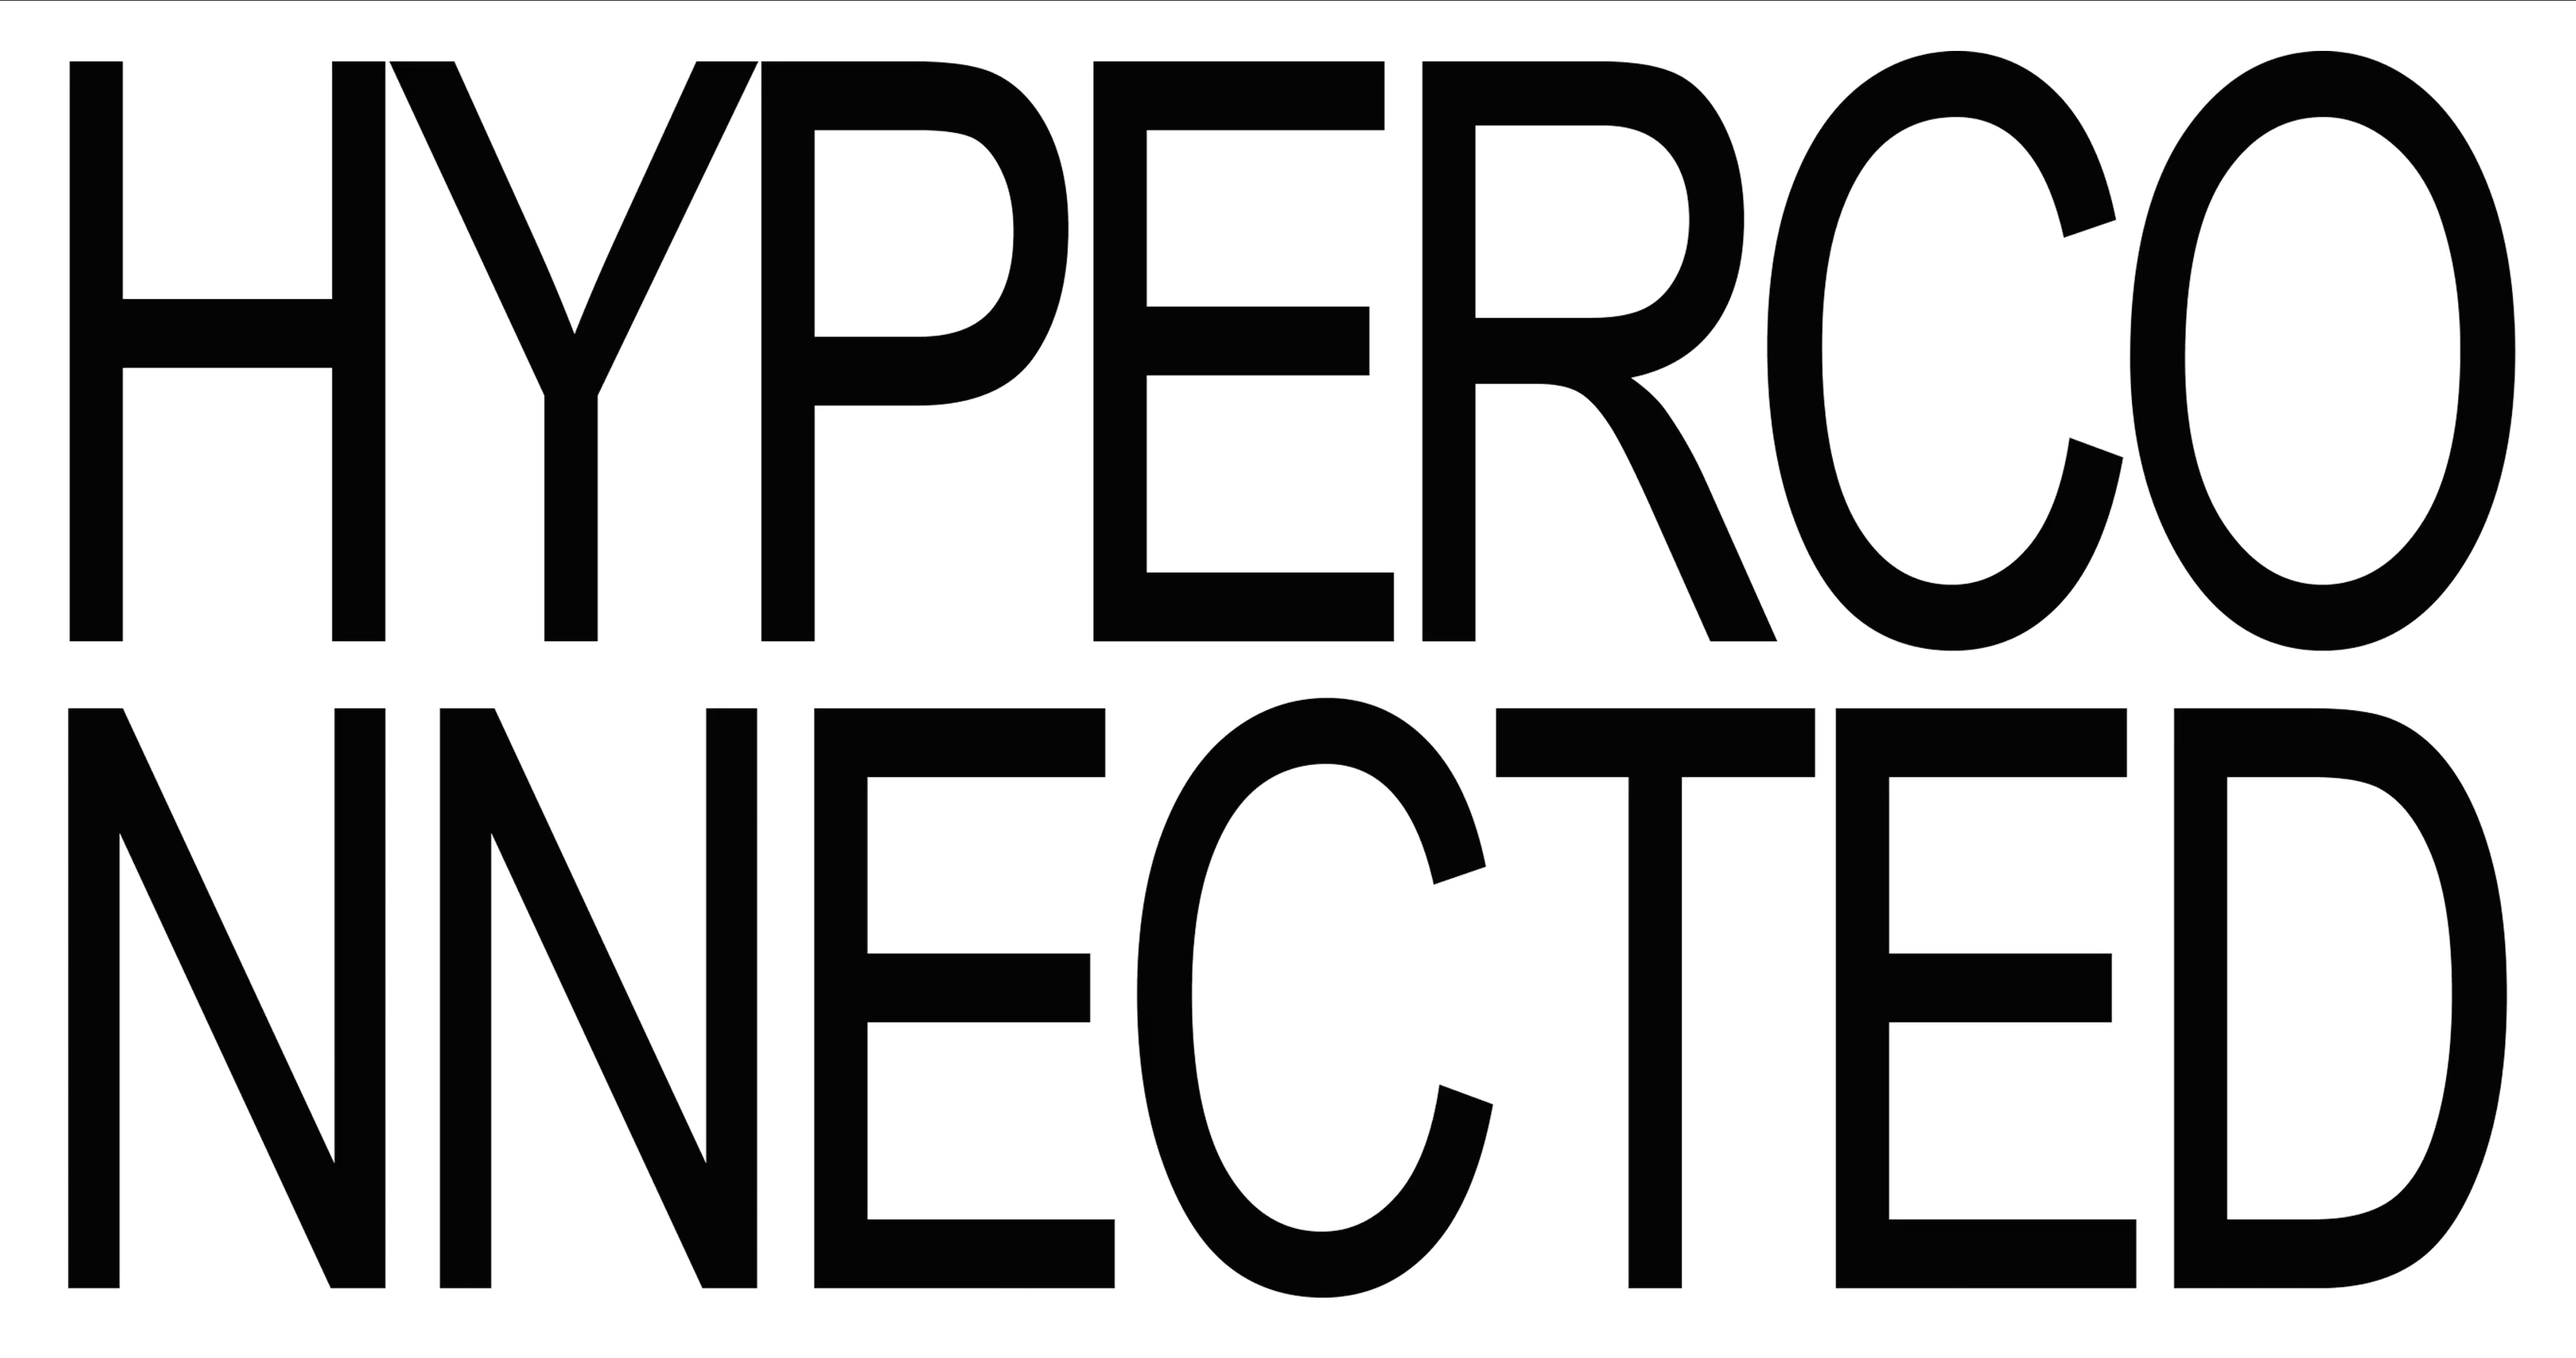 HYPERCONNECTED